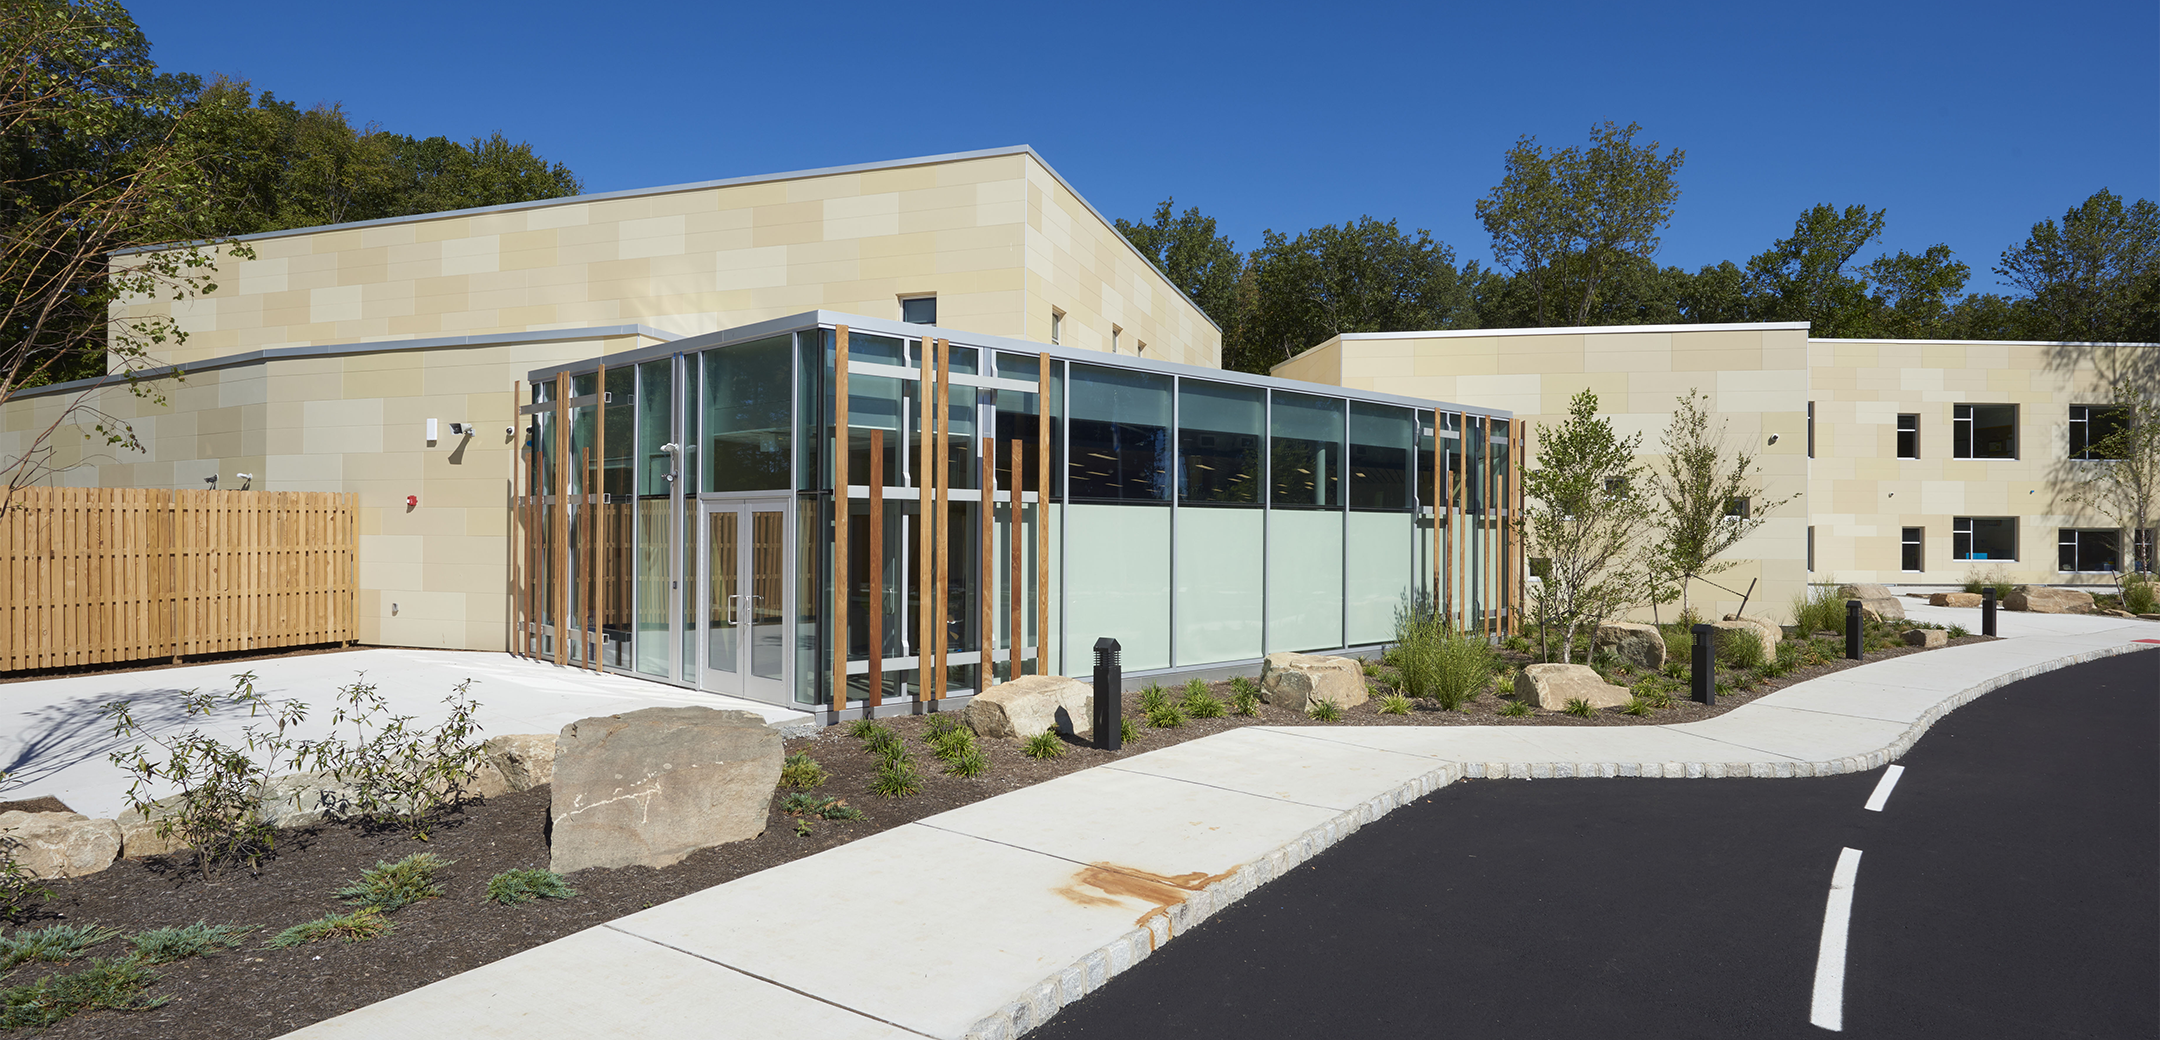 An angled view of the Gottesman RTW Academy back glass exit with a paved courtyard and landscaped area separating the building from the sidewalk.